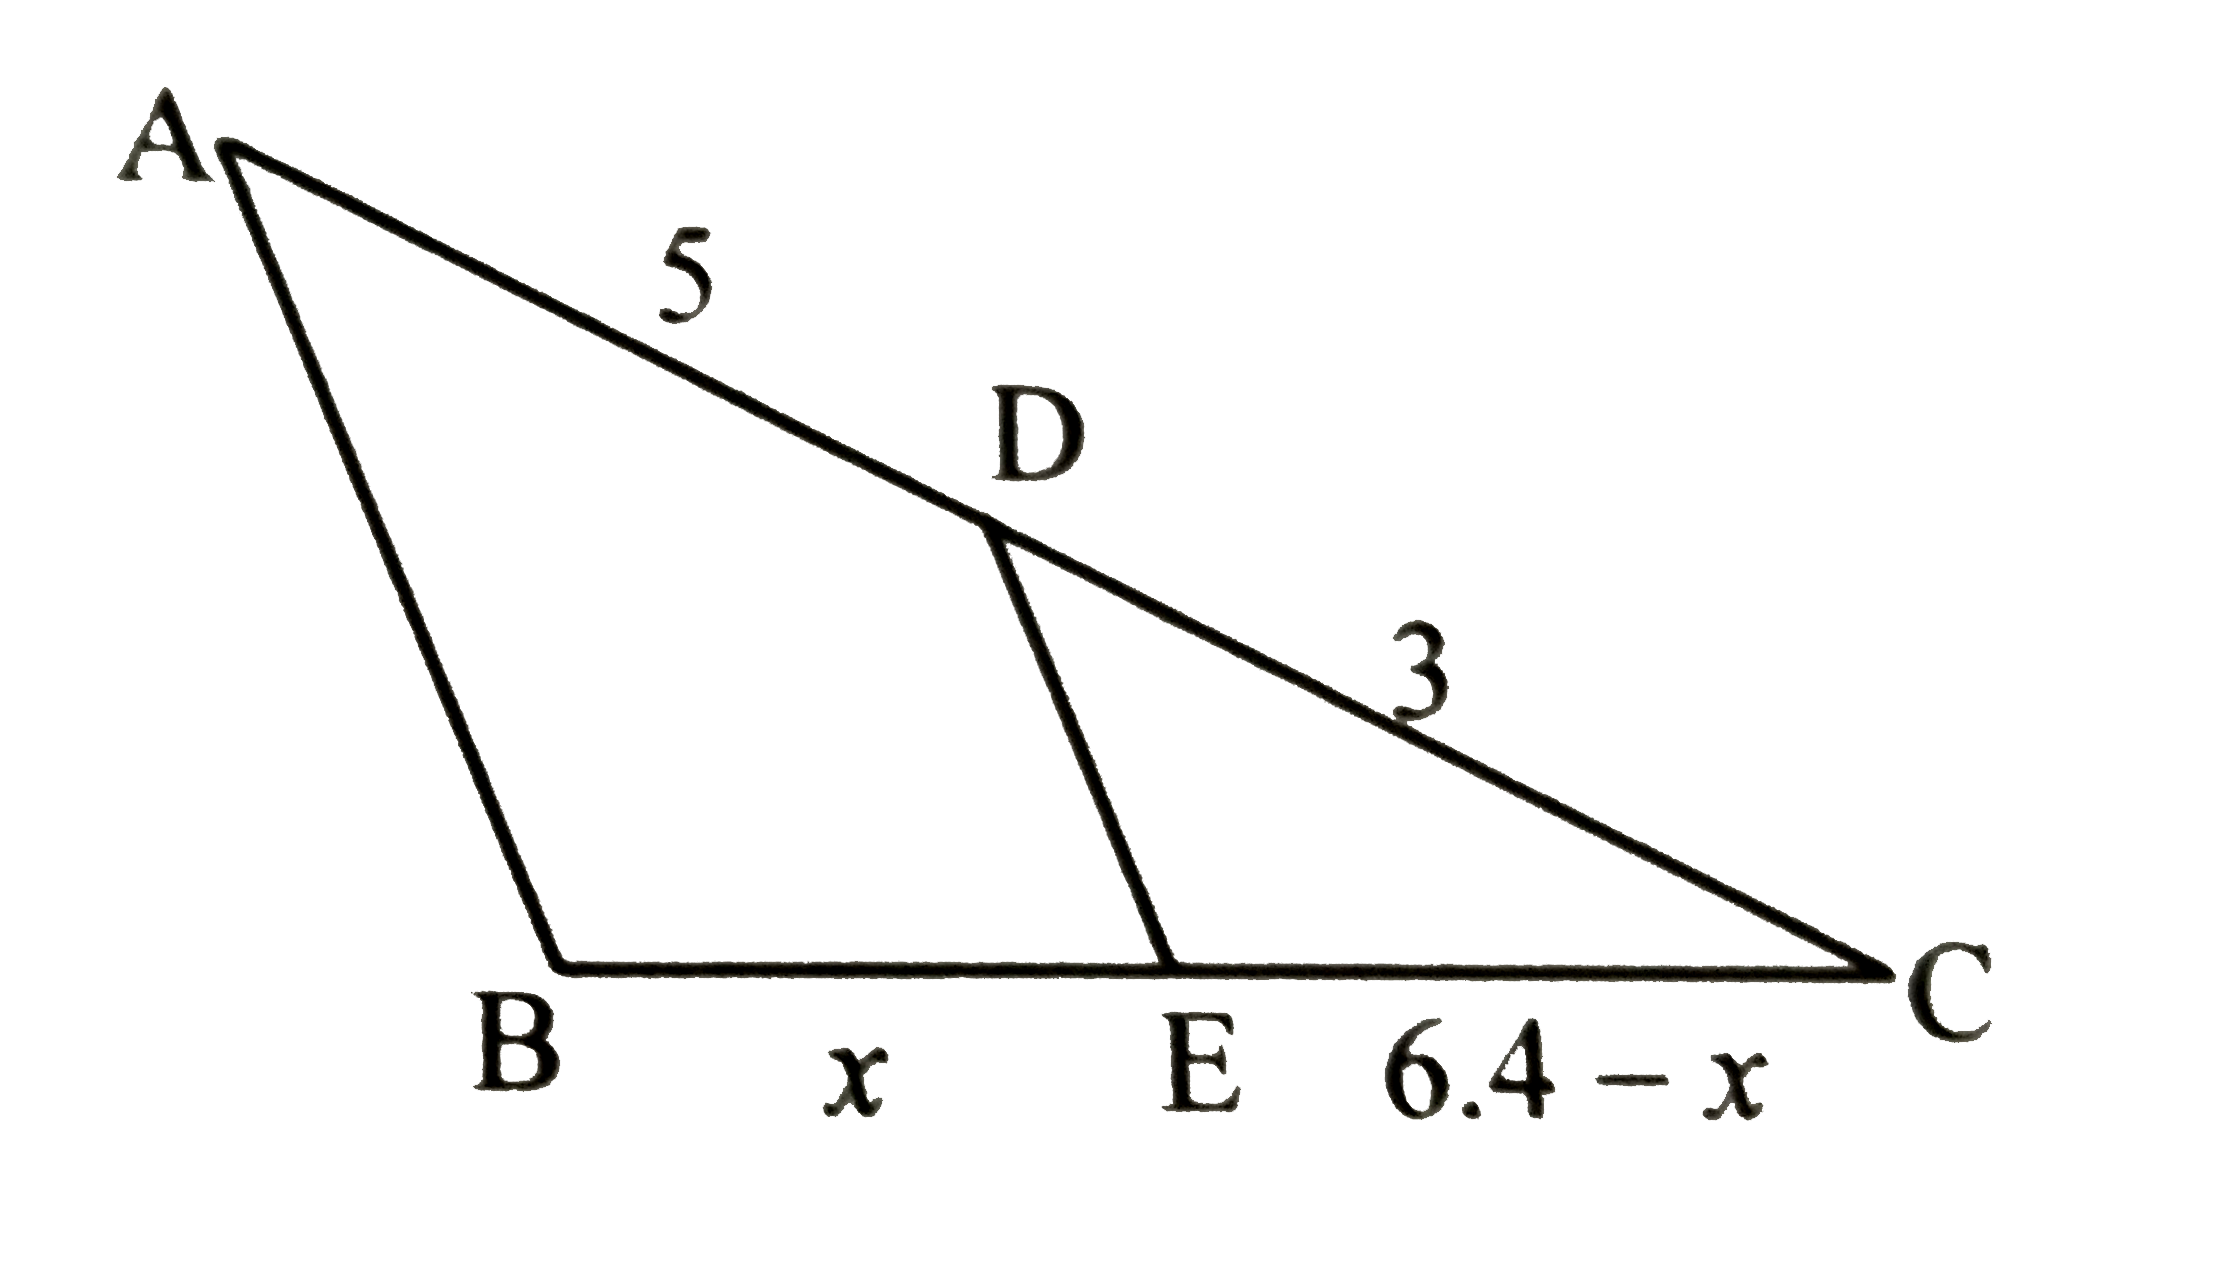 In the adoining figure, A - D - C and B - E -C . Seg DE abs() side AB. If AD = 5, DC = 3, BC = 6.4, then find BE.